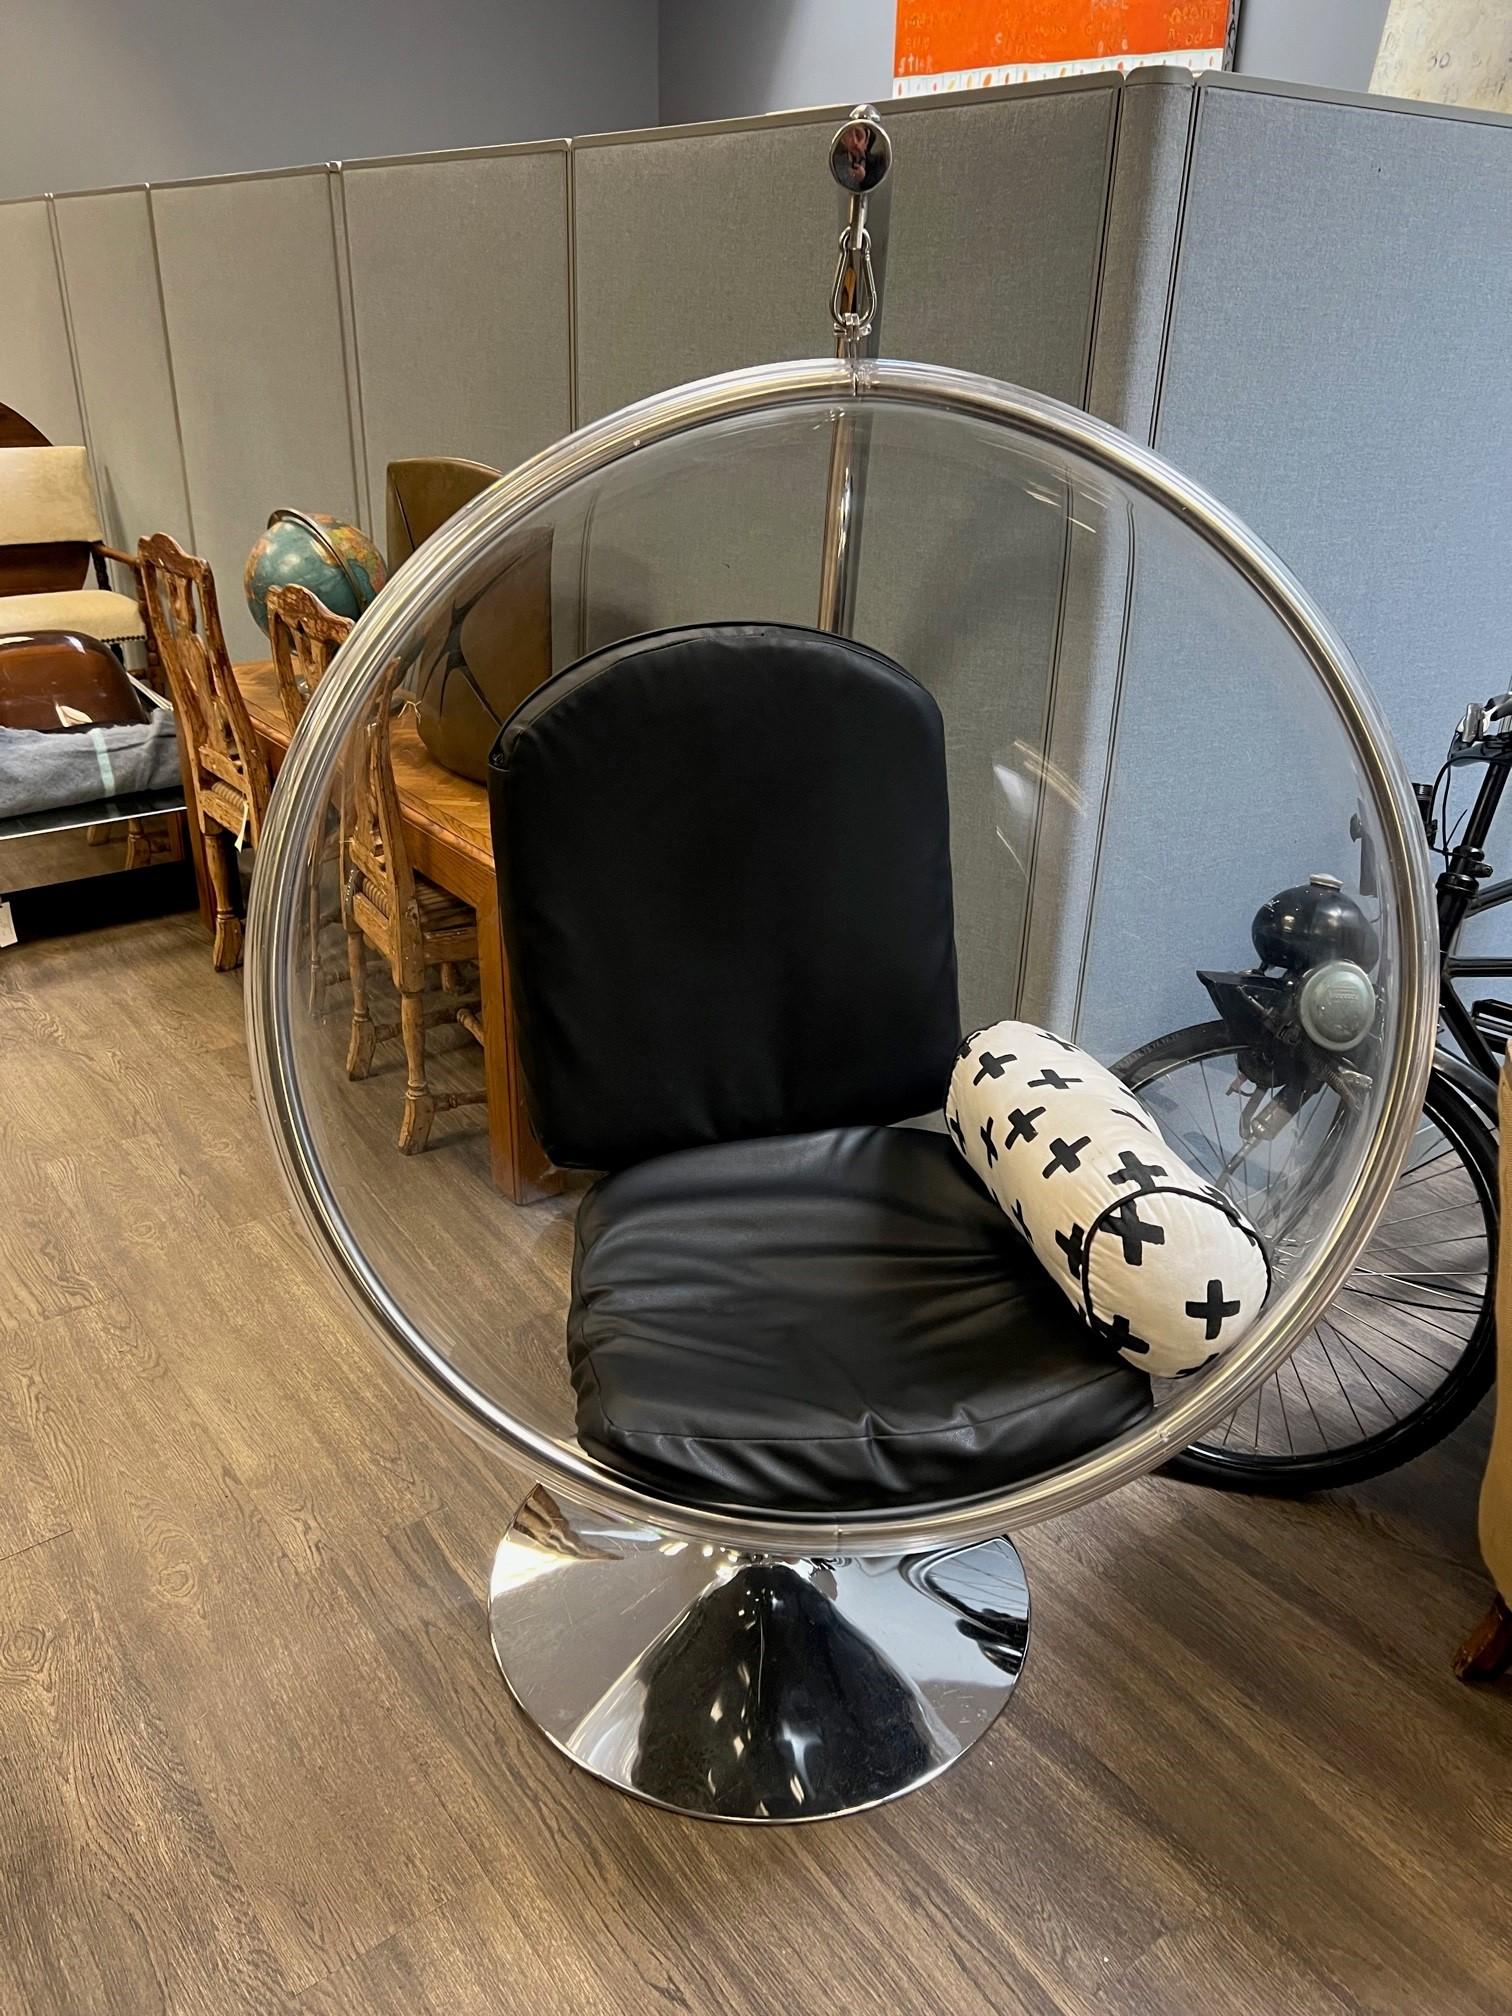 20th Century modern ball lounge chair. 

The bubble chair was originally designed in 1968 by Eero Aarnio. 

Features a modern futuristic pod hanging bubble shape made from clear acrylic with a chromed metal swivel frame. 

Accompanied with two